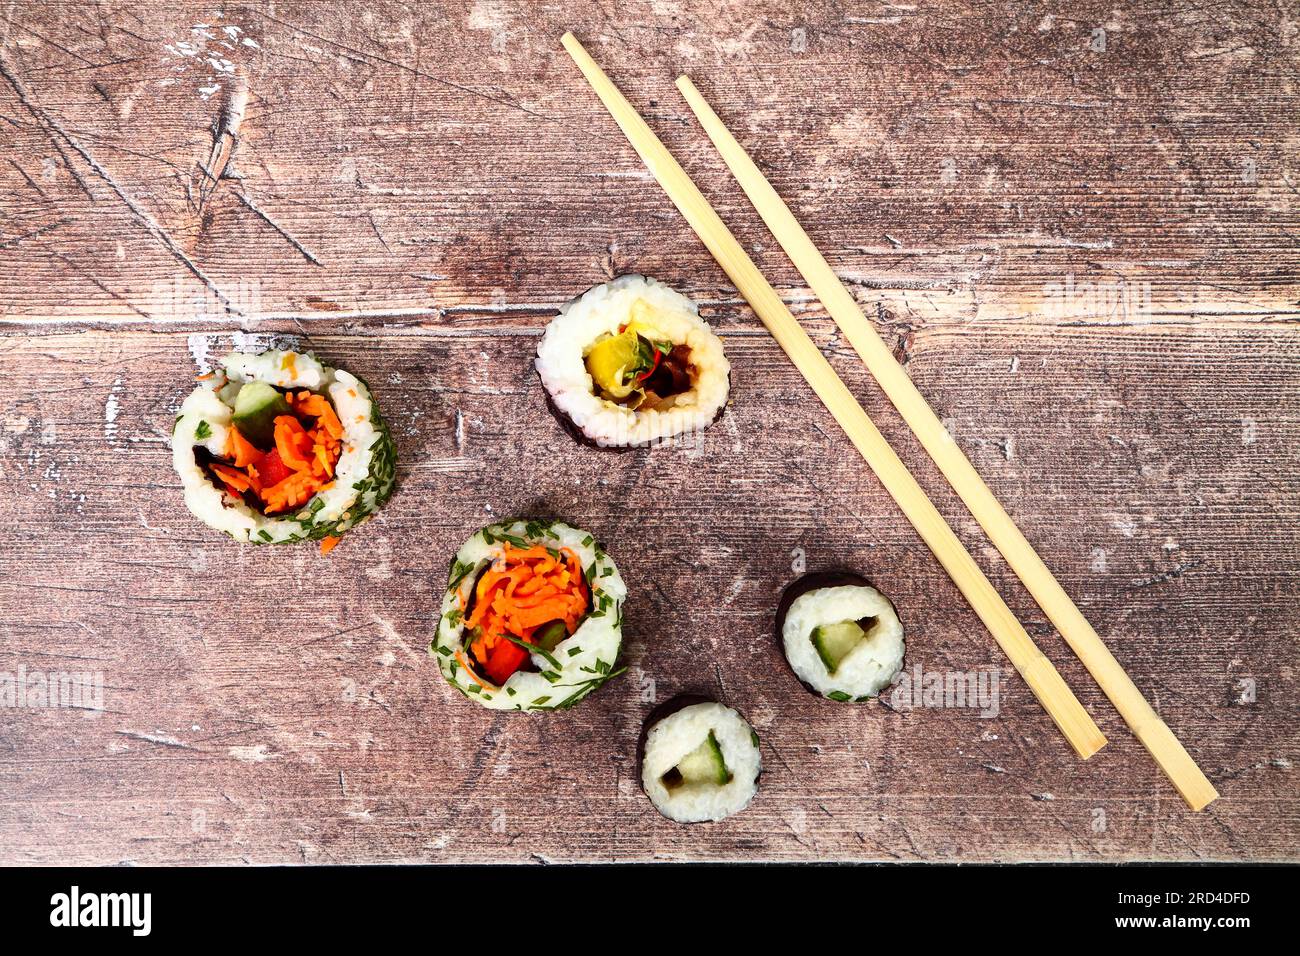 Sushi rolls and chopsticks on a wood table Stock Photo